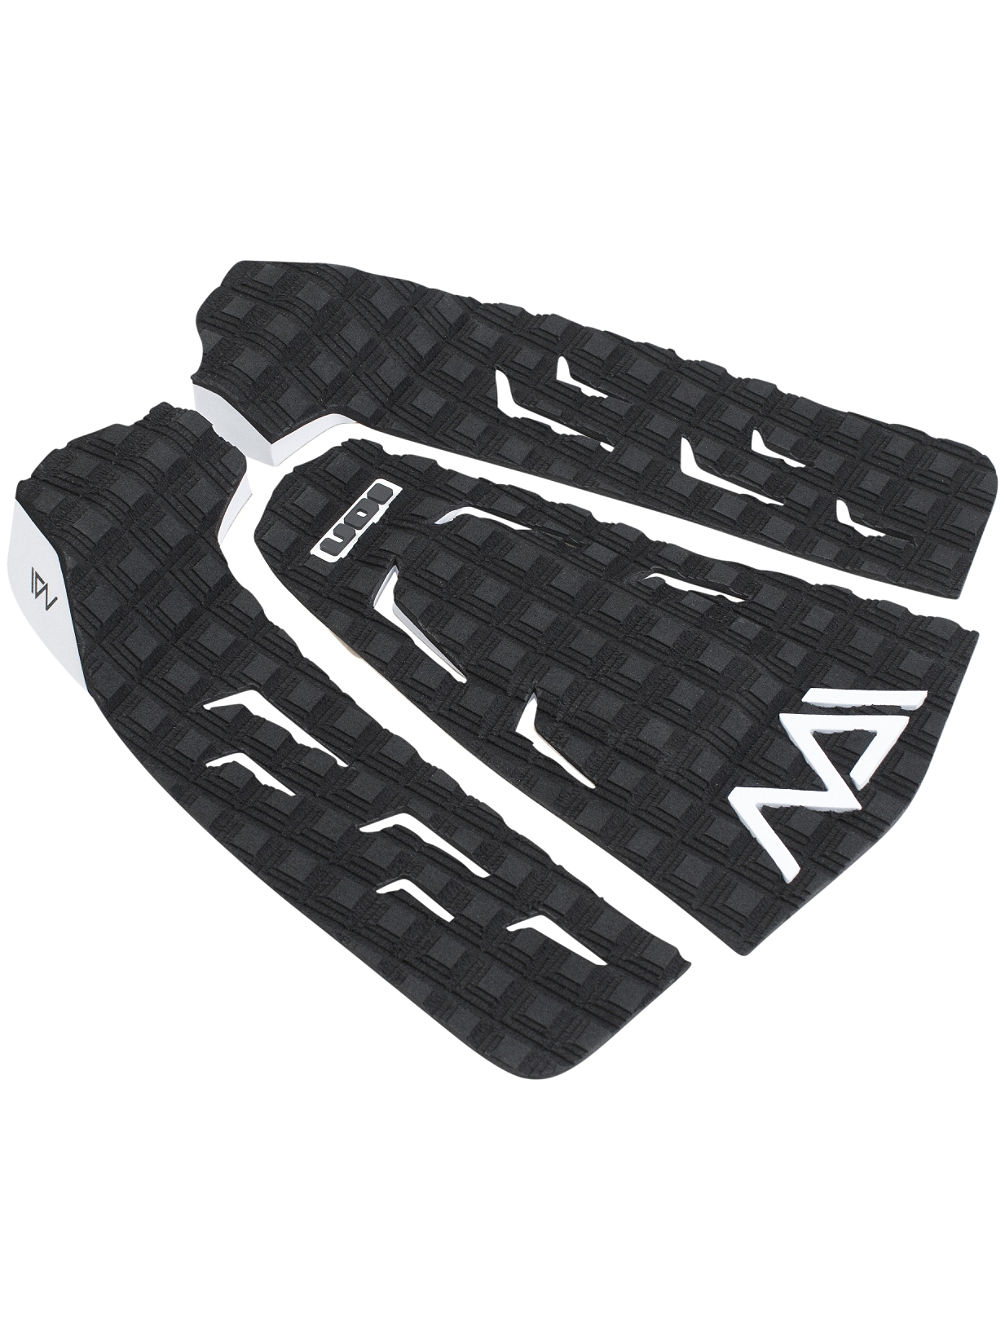 Maiden (3Pcs) Traction Tail Pad